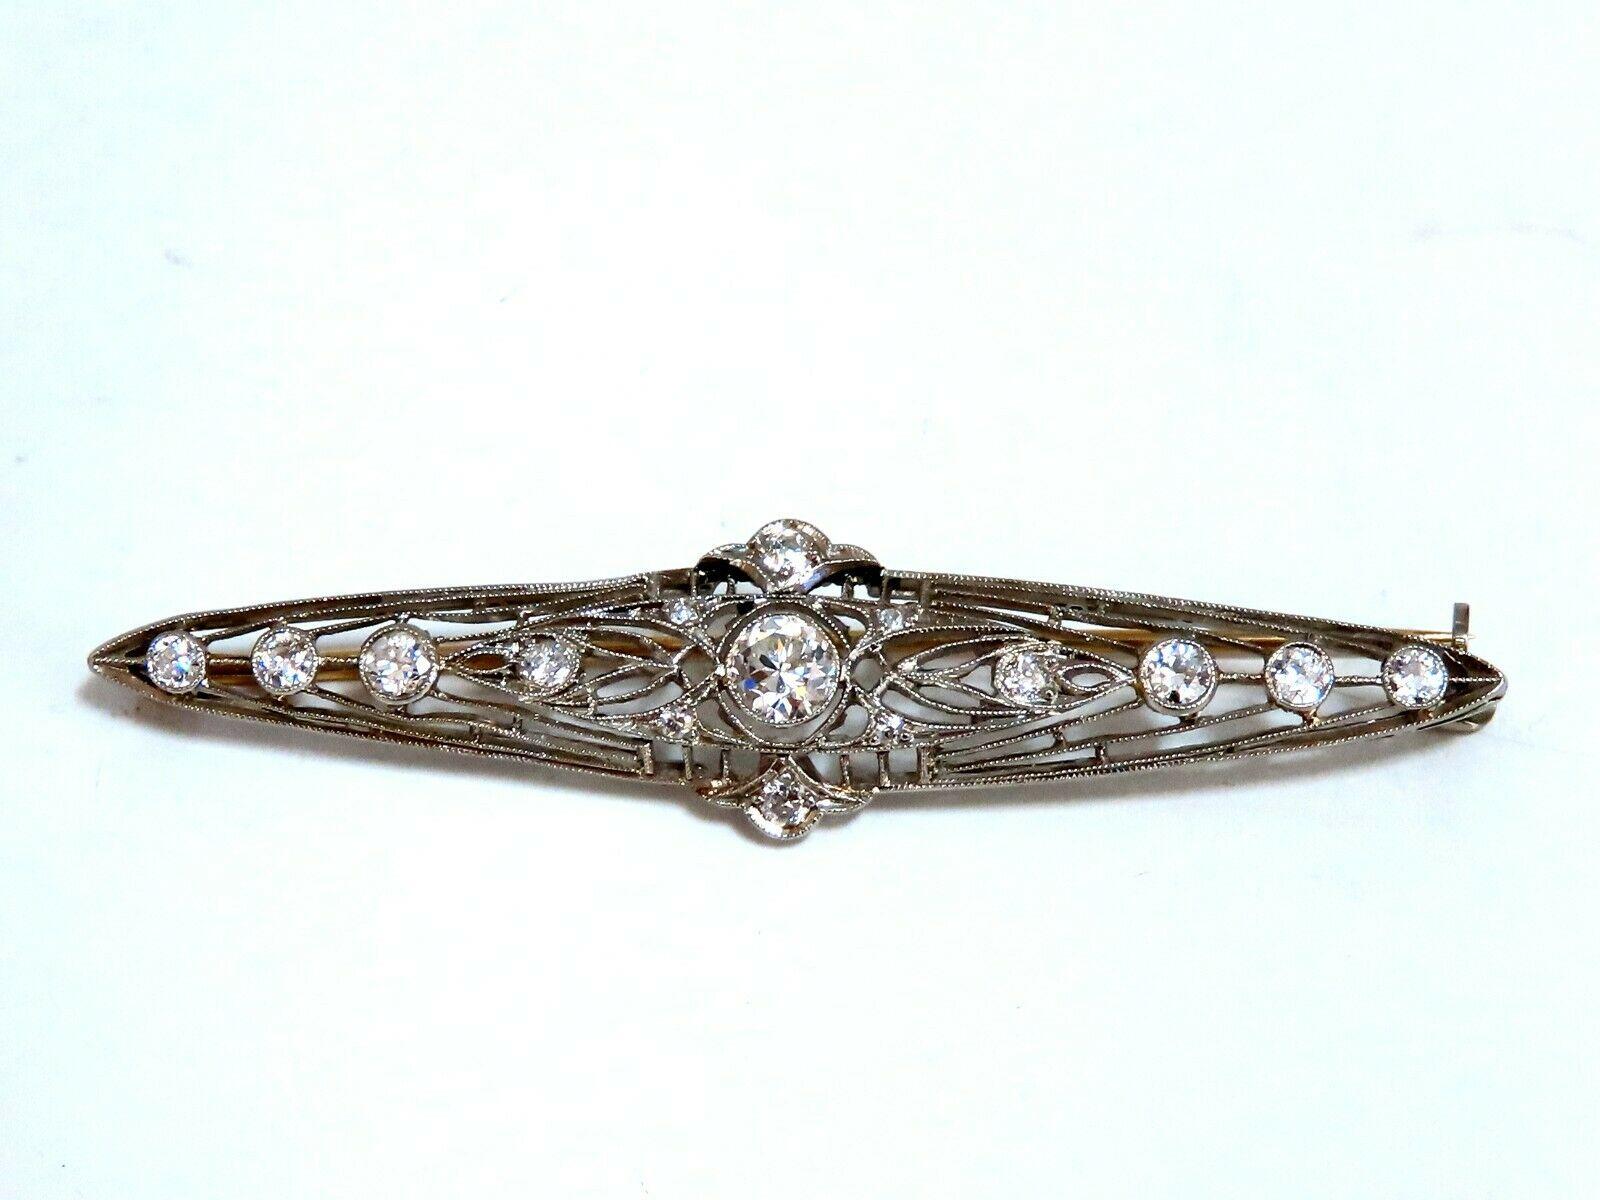 American Vintage Revival.

.70ct. diamonds brooch pin.

Rounds, Full cut Brilliant.

G-color Vs-2clarity.

14kt gold 

5.2 grams.

Overall: 2.1 X .49 inch

Excellent made 